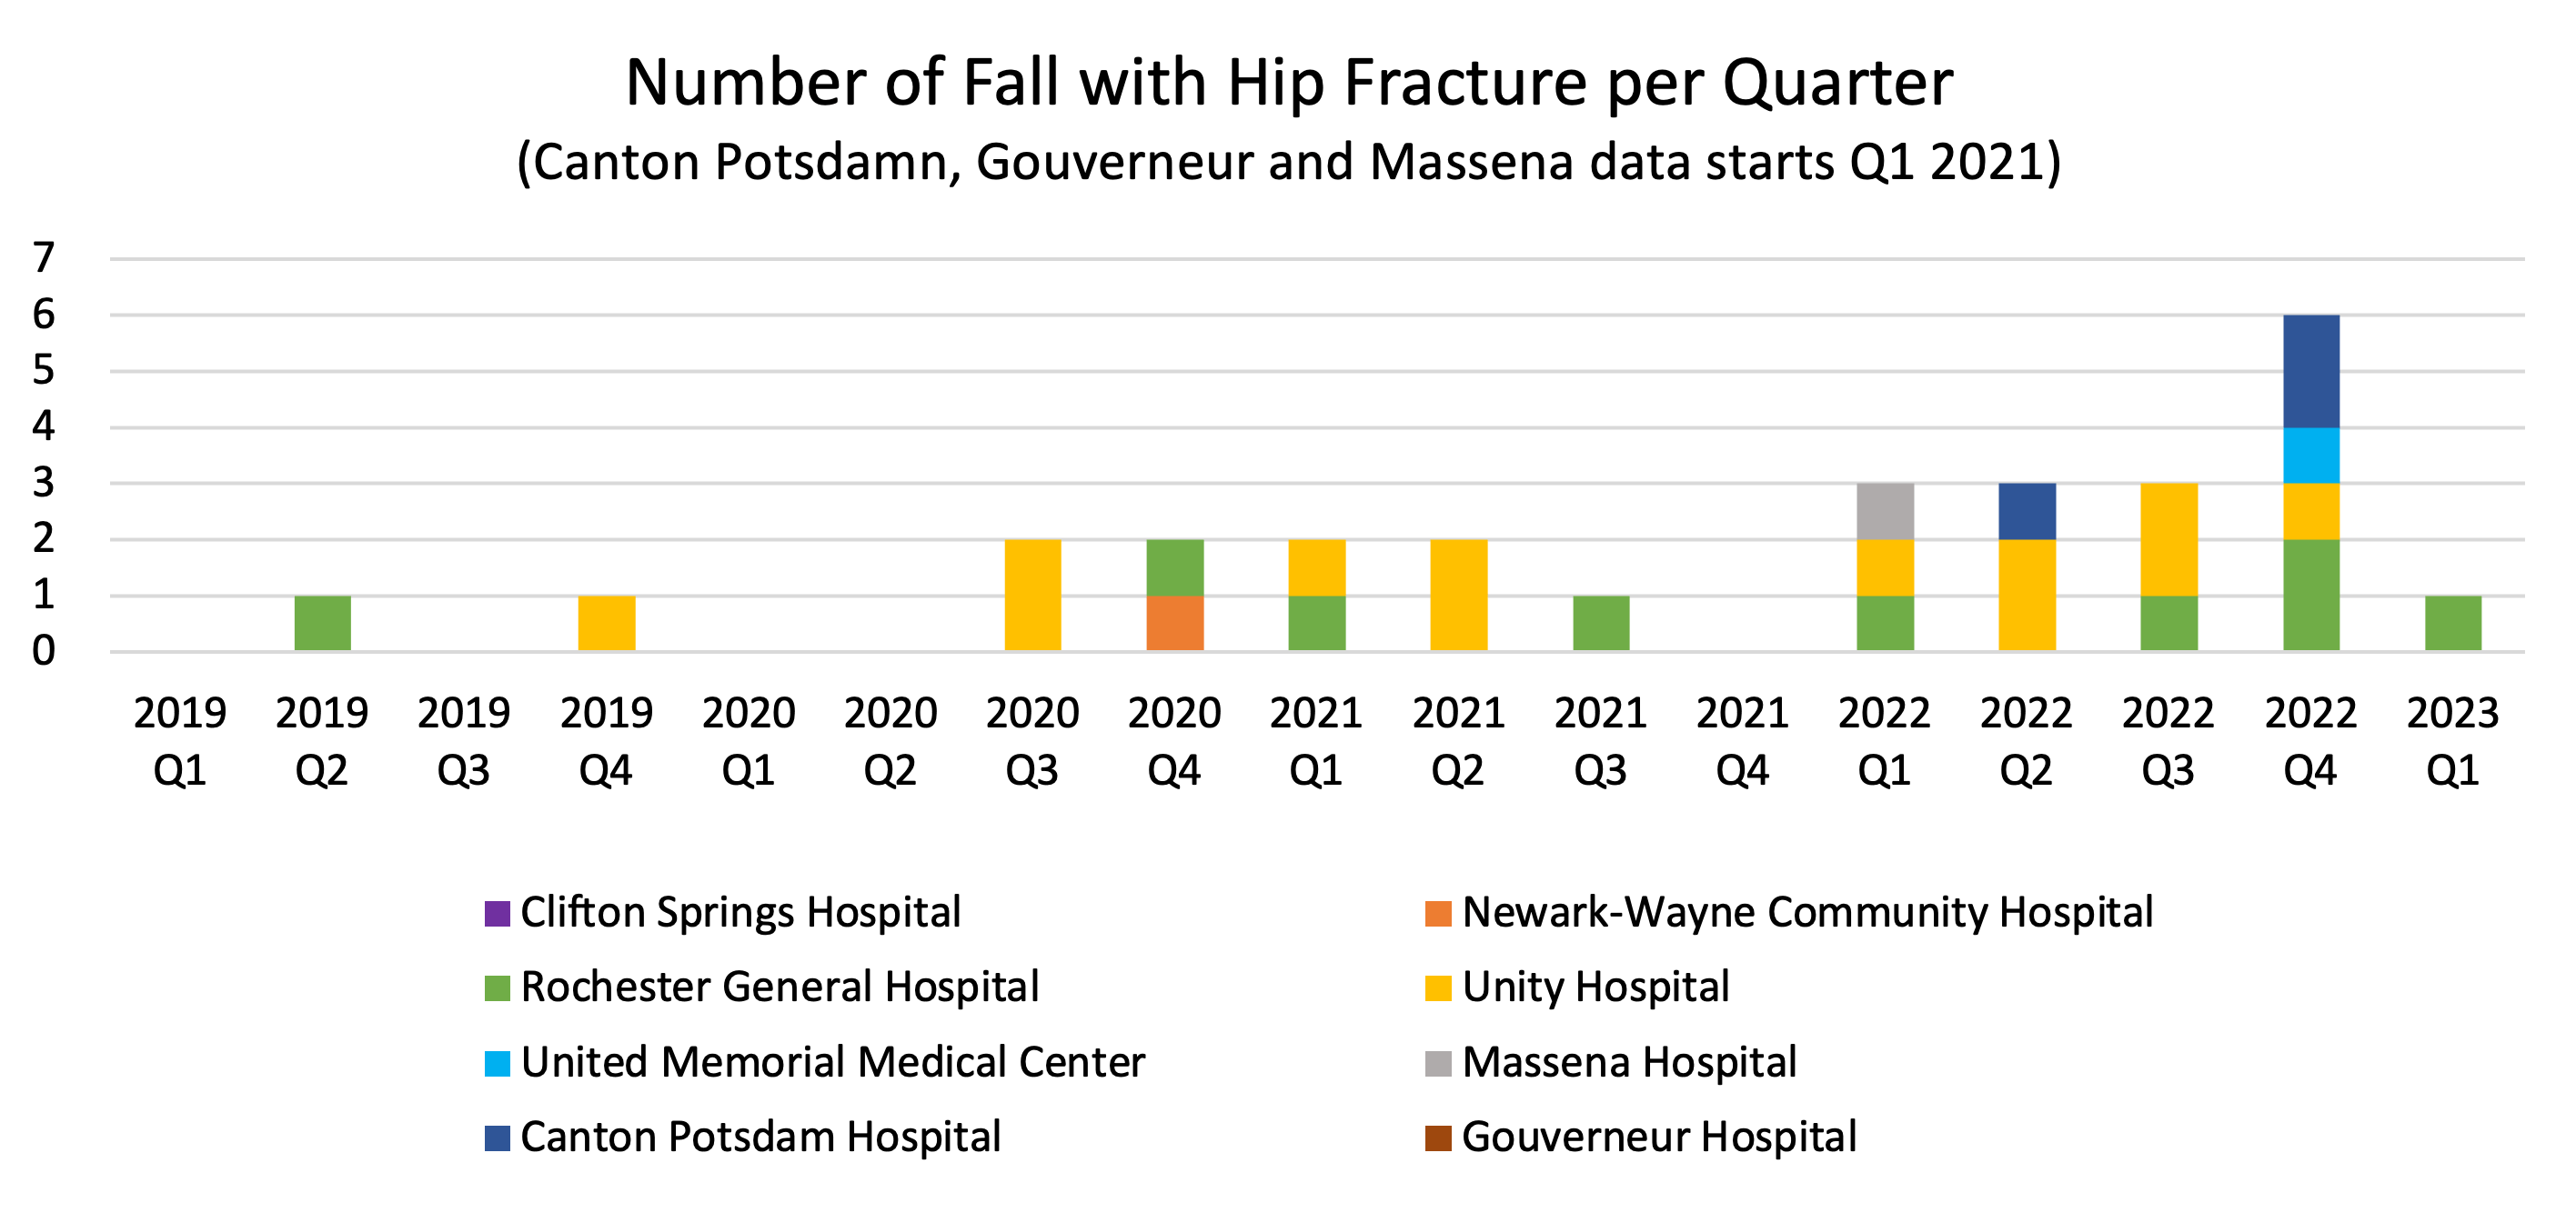 Number of falls with hip fracture per quarter